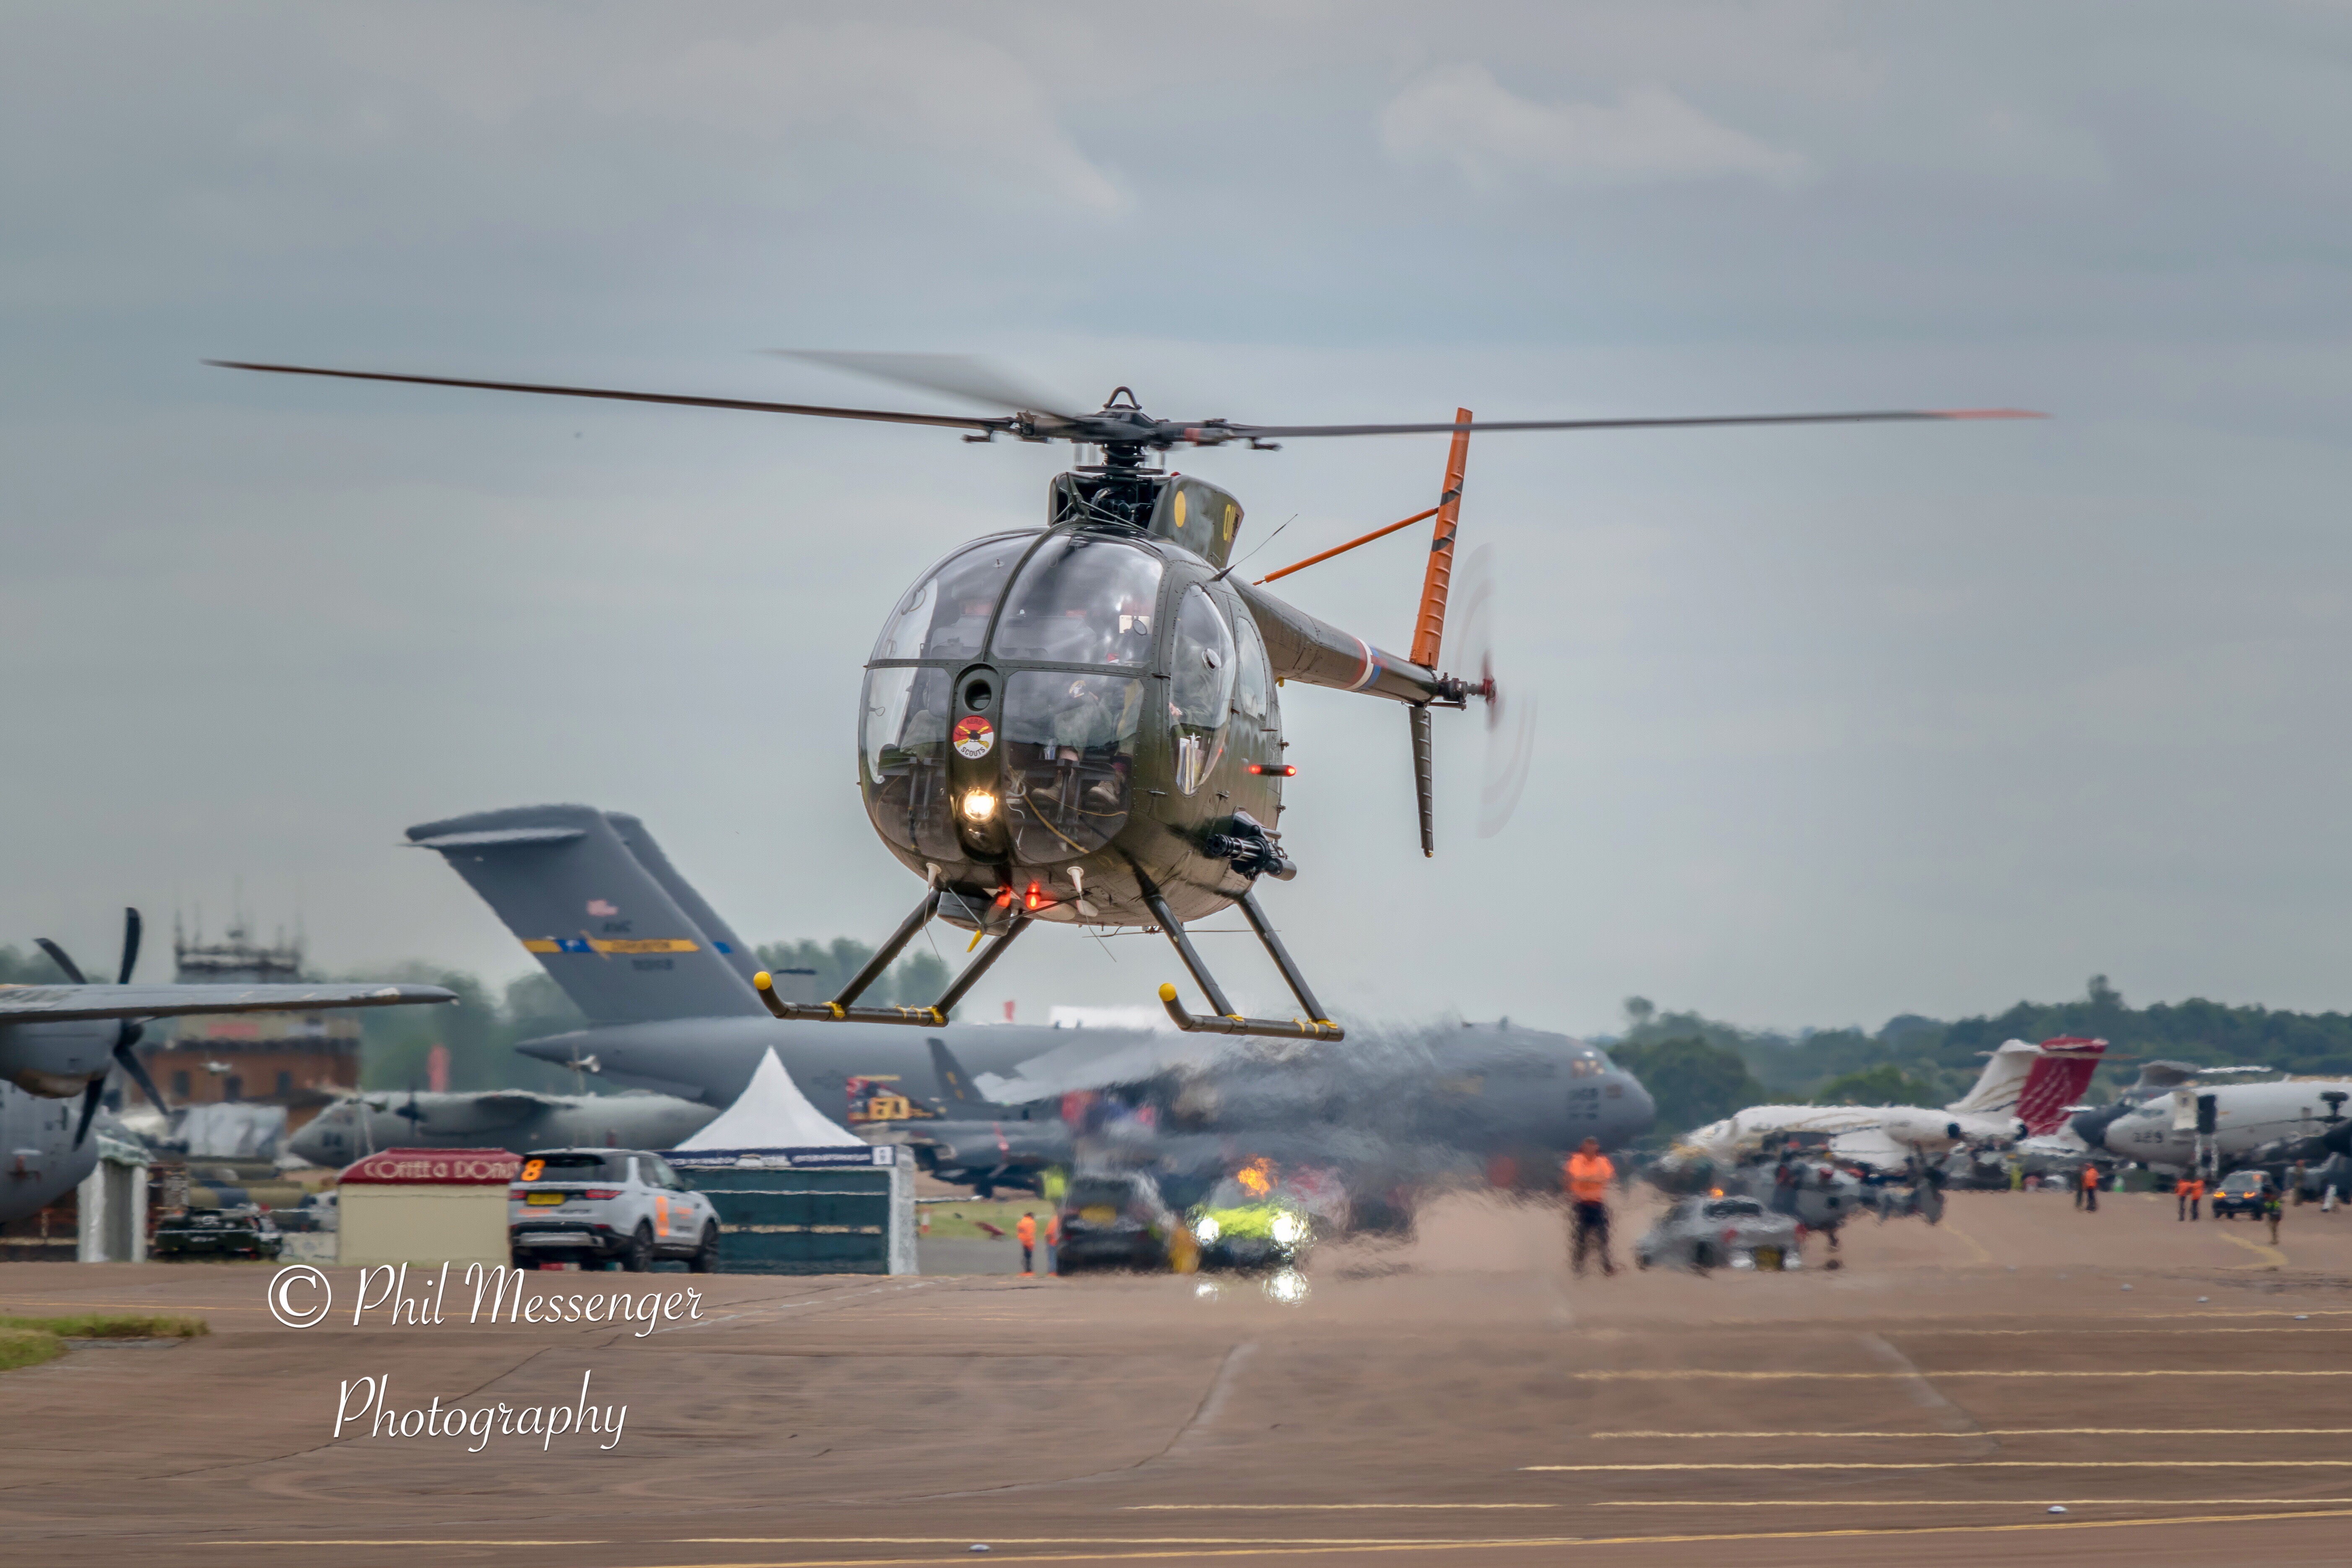 The Hughes OH-6 Cayuse departing the Royal International Air Tattoo.